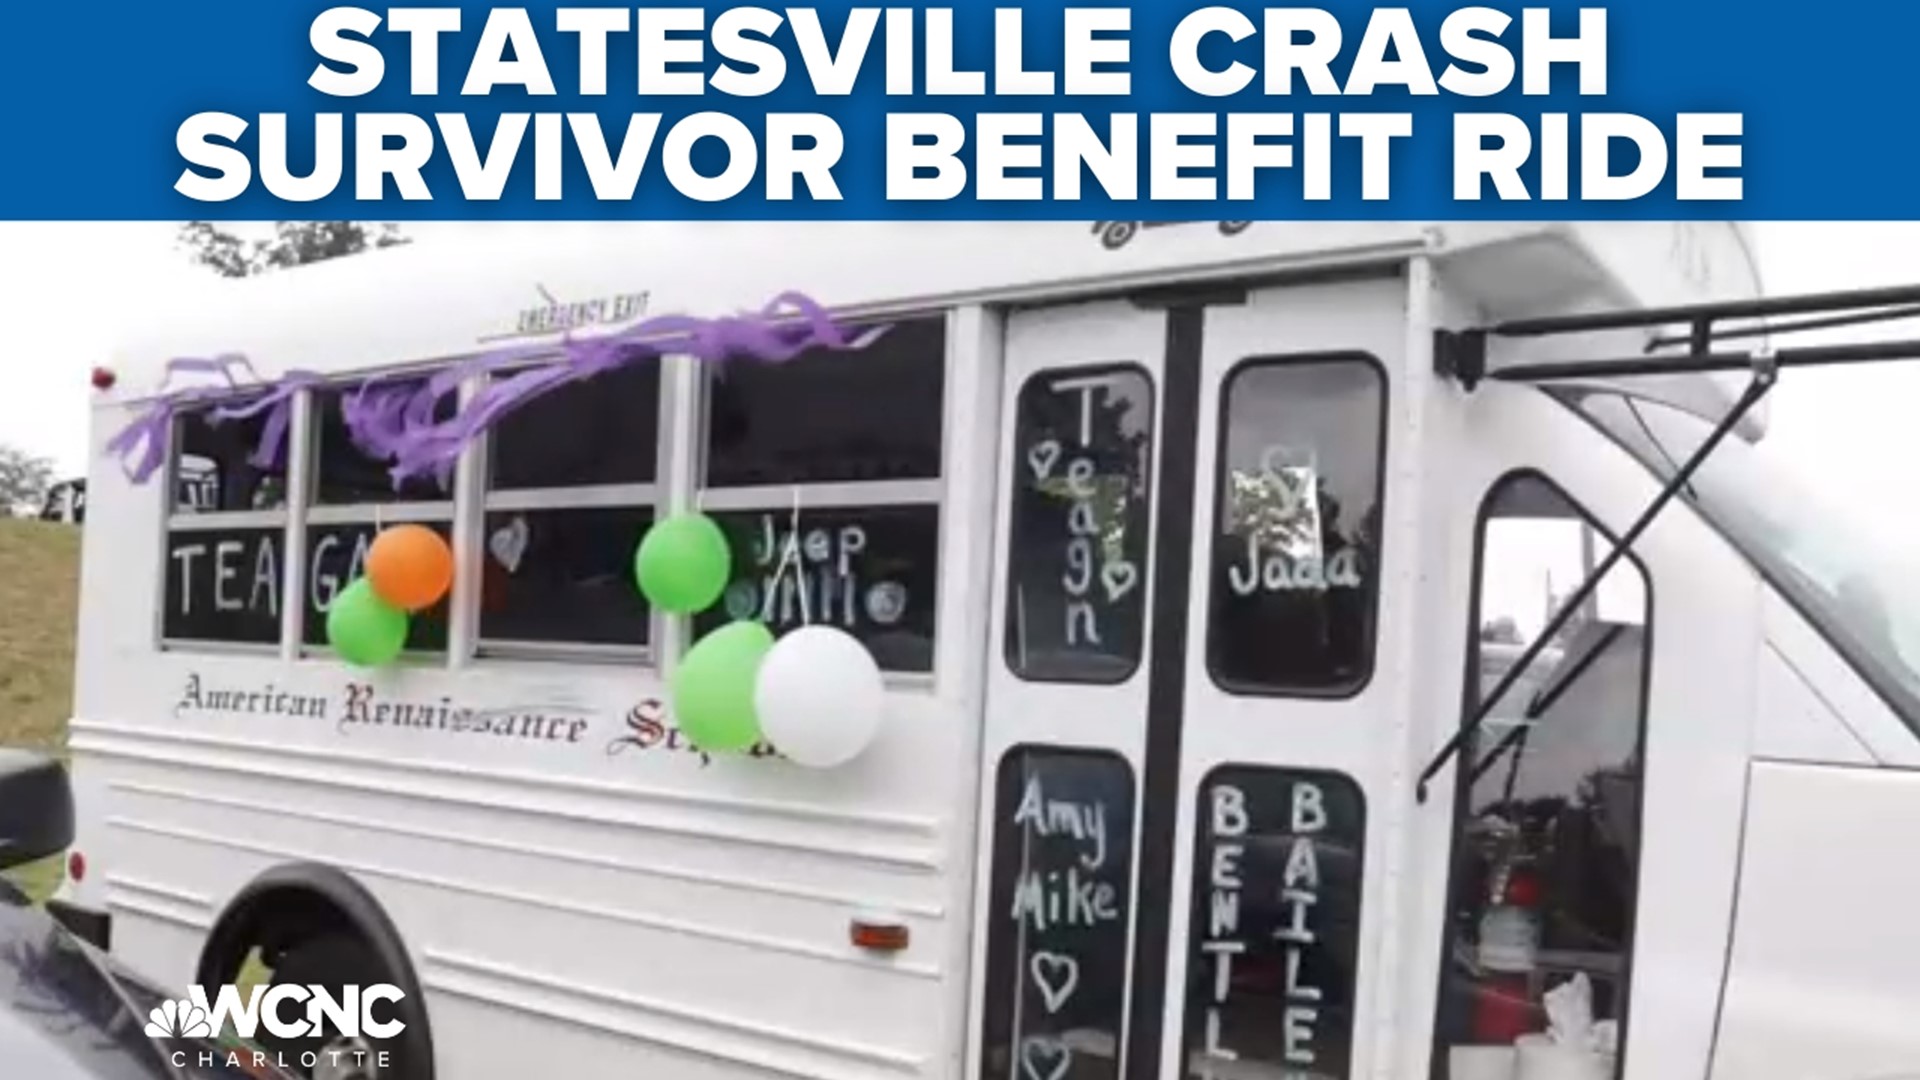 A benefit ride was held for the survivors and victims of a deadly golf cart crash in Statesville.